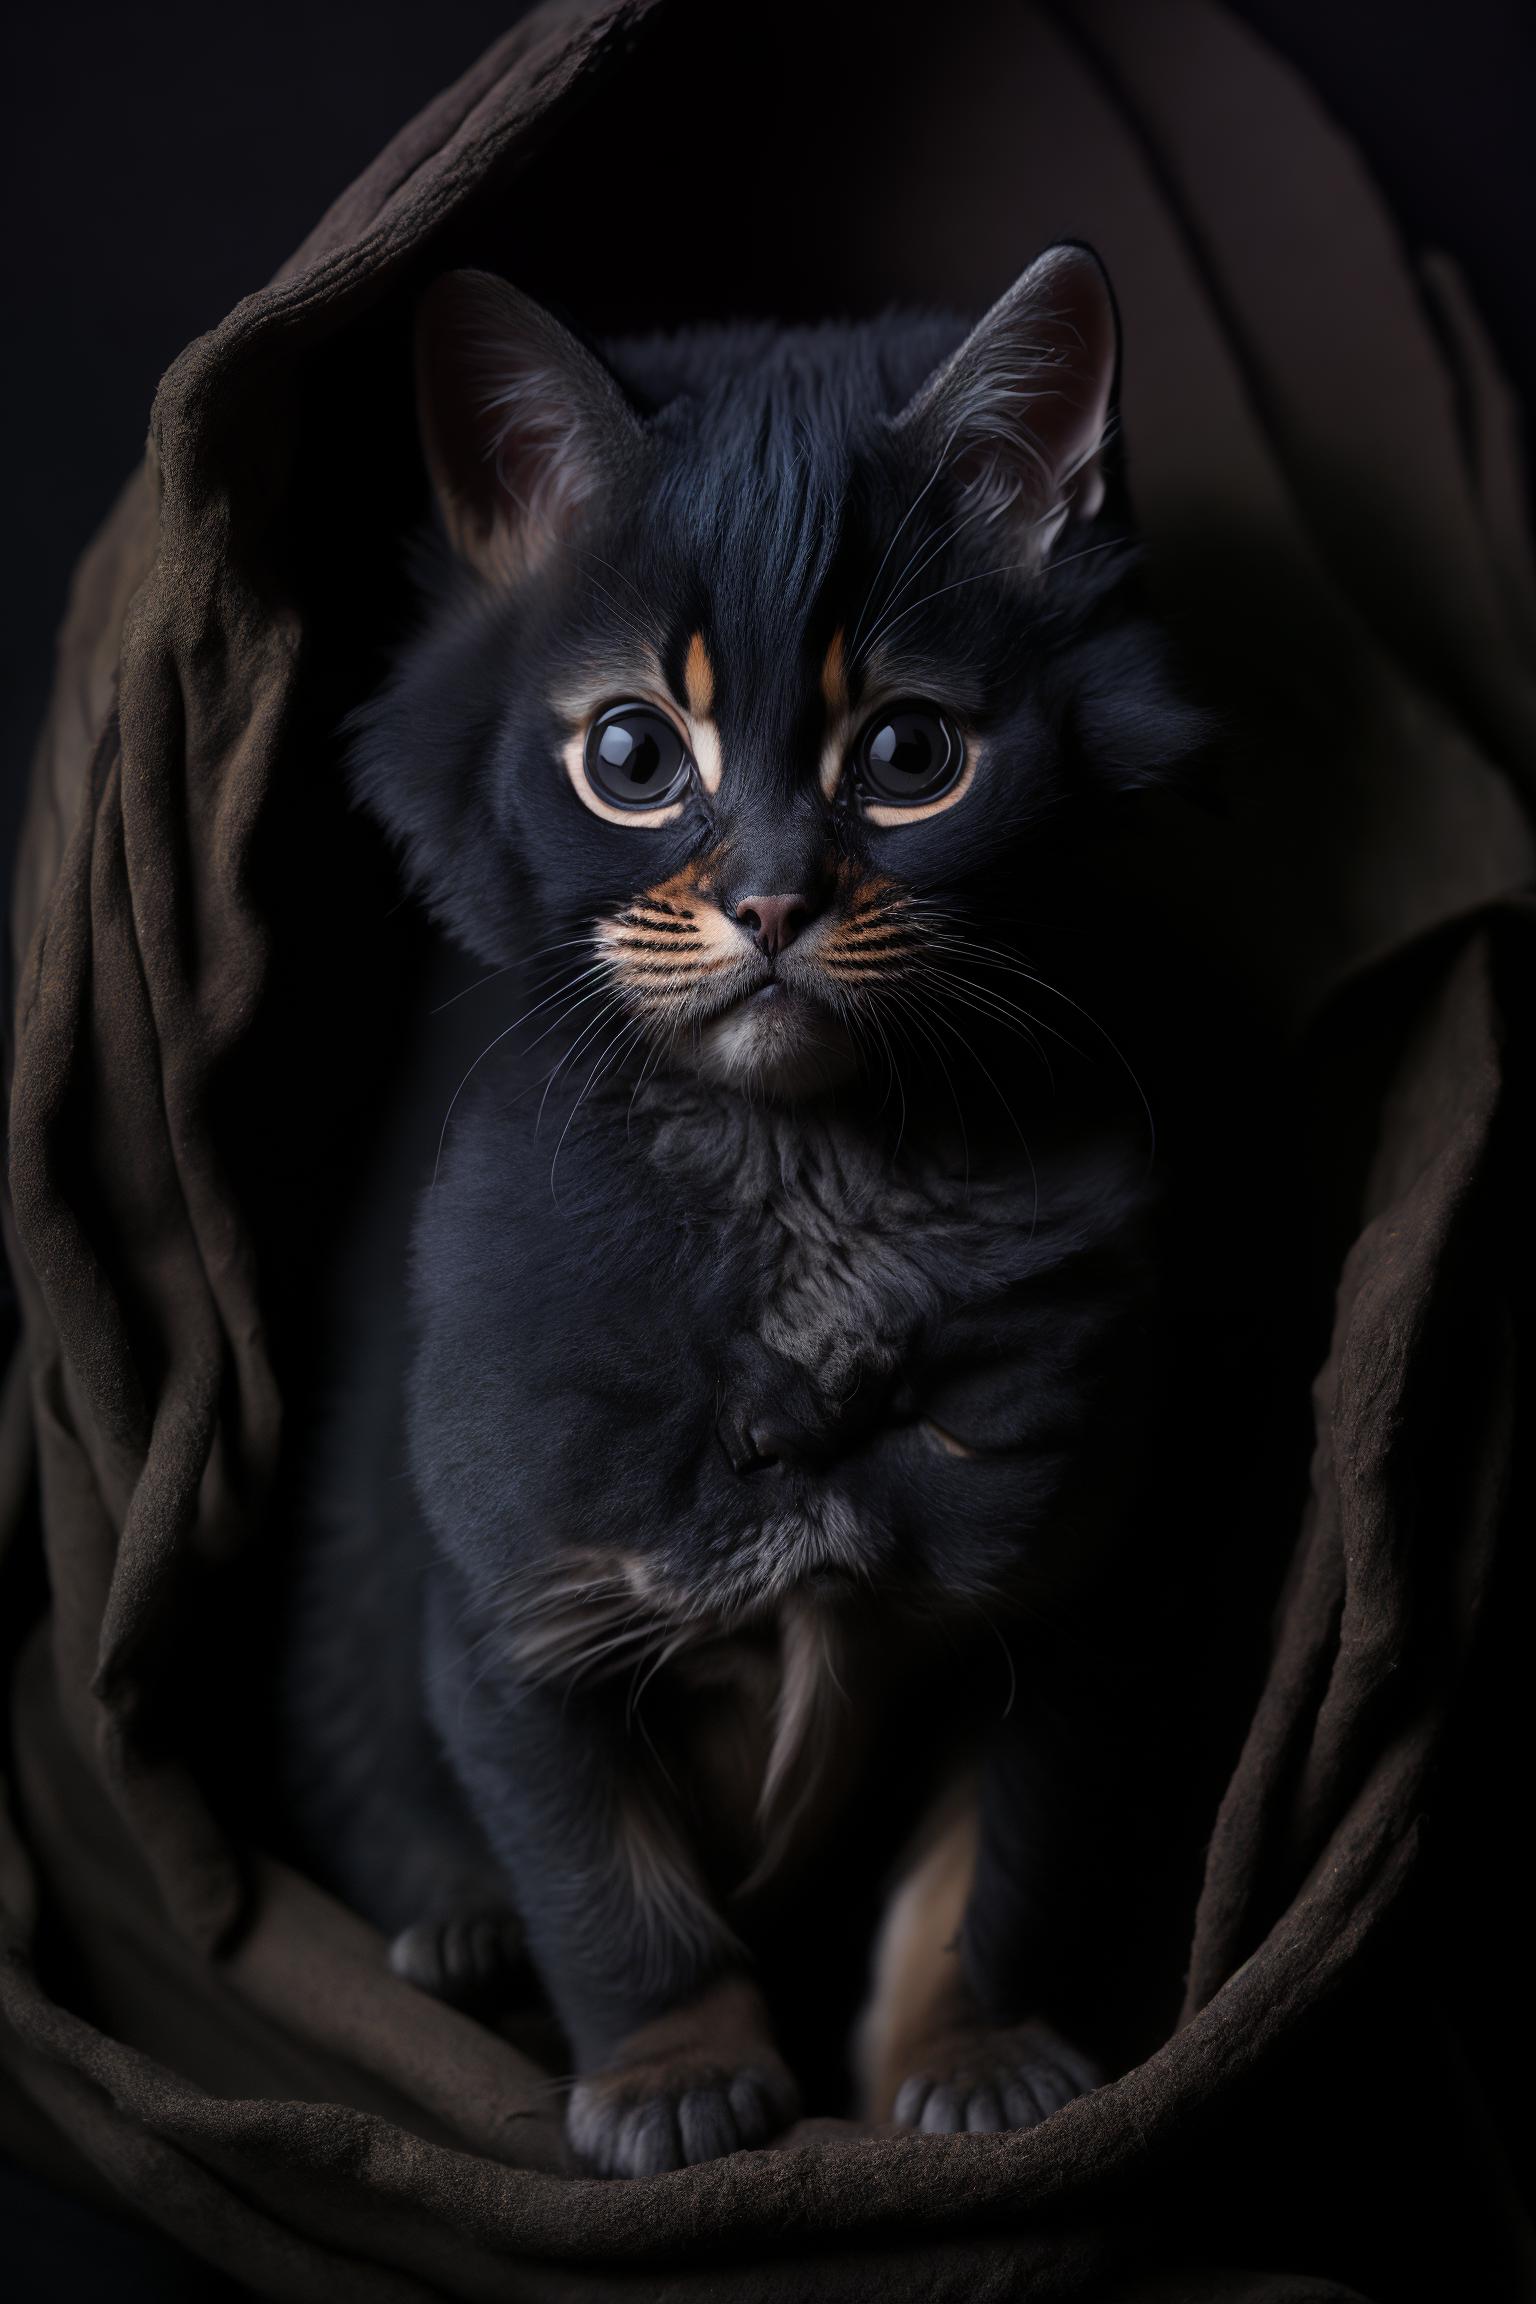 A black kitten with yellow eyes sitting under a blanket.